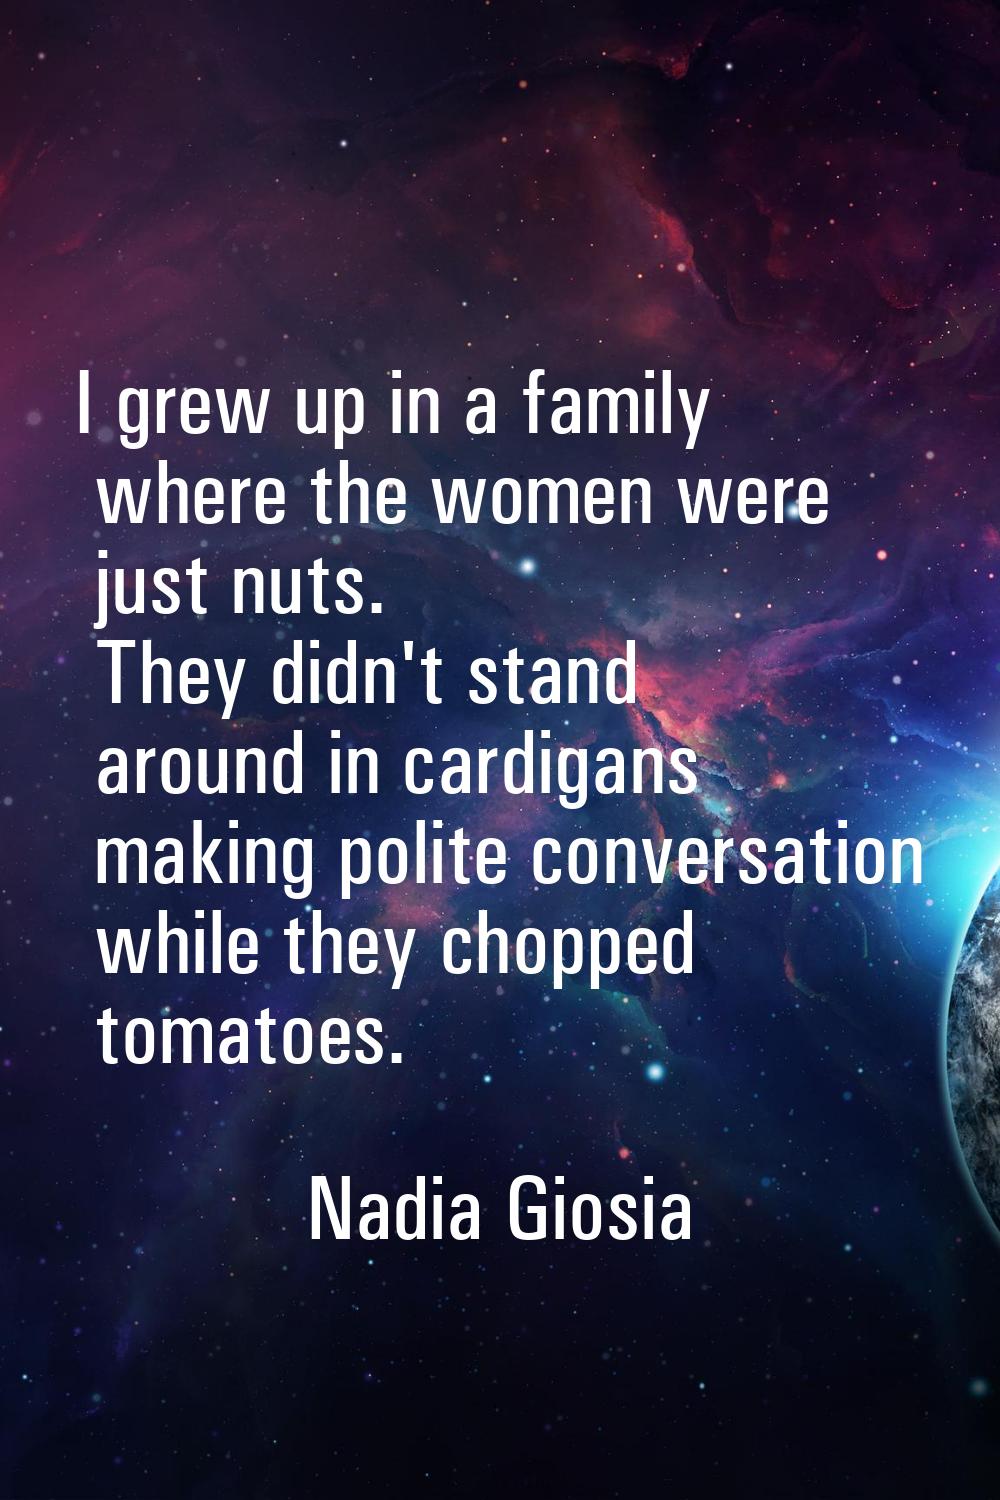 I grew up in a family where the women were just nuts. They didn't stand around in cardigans making 